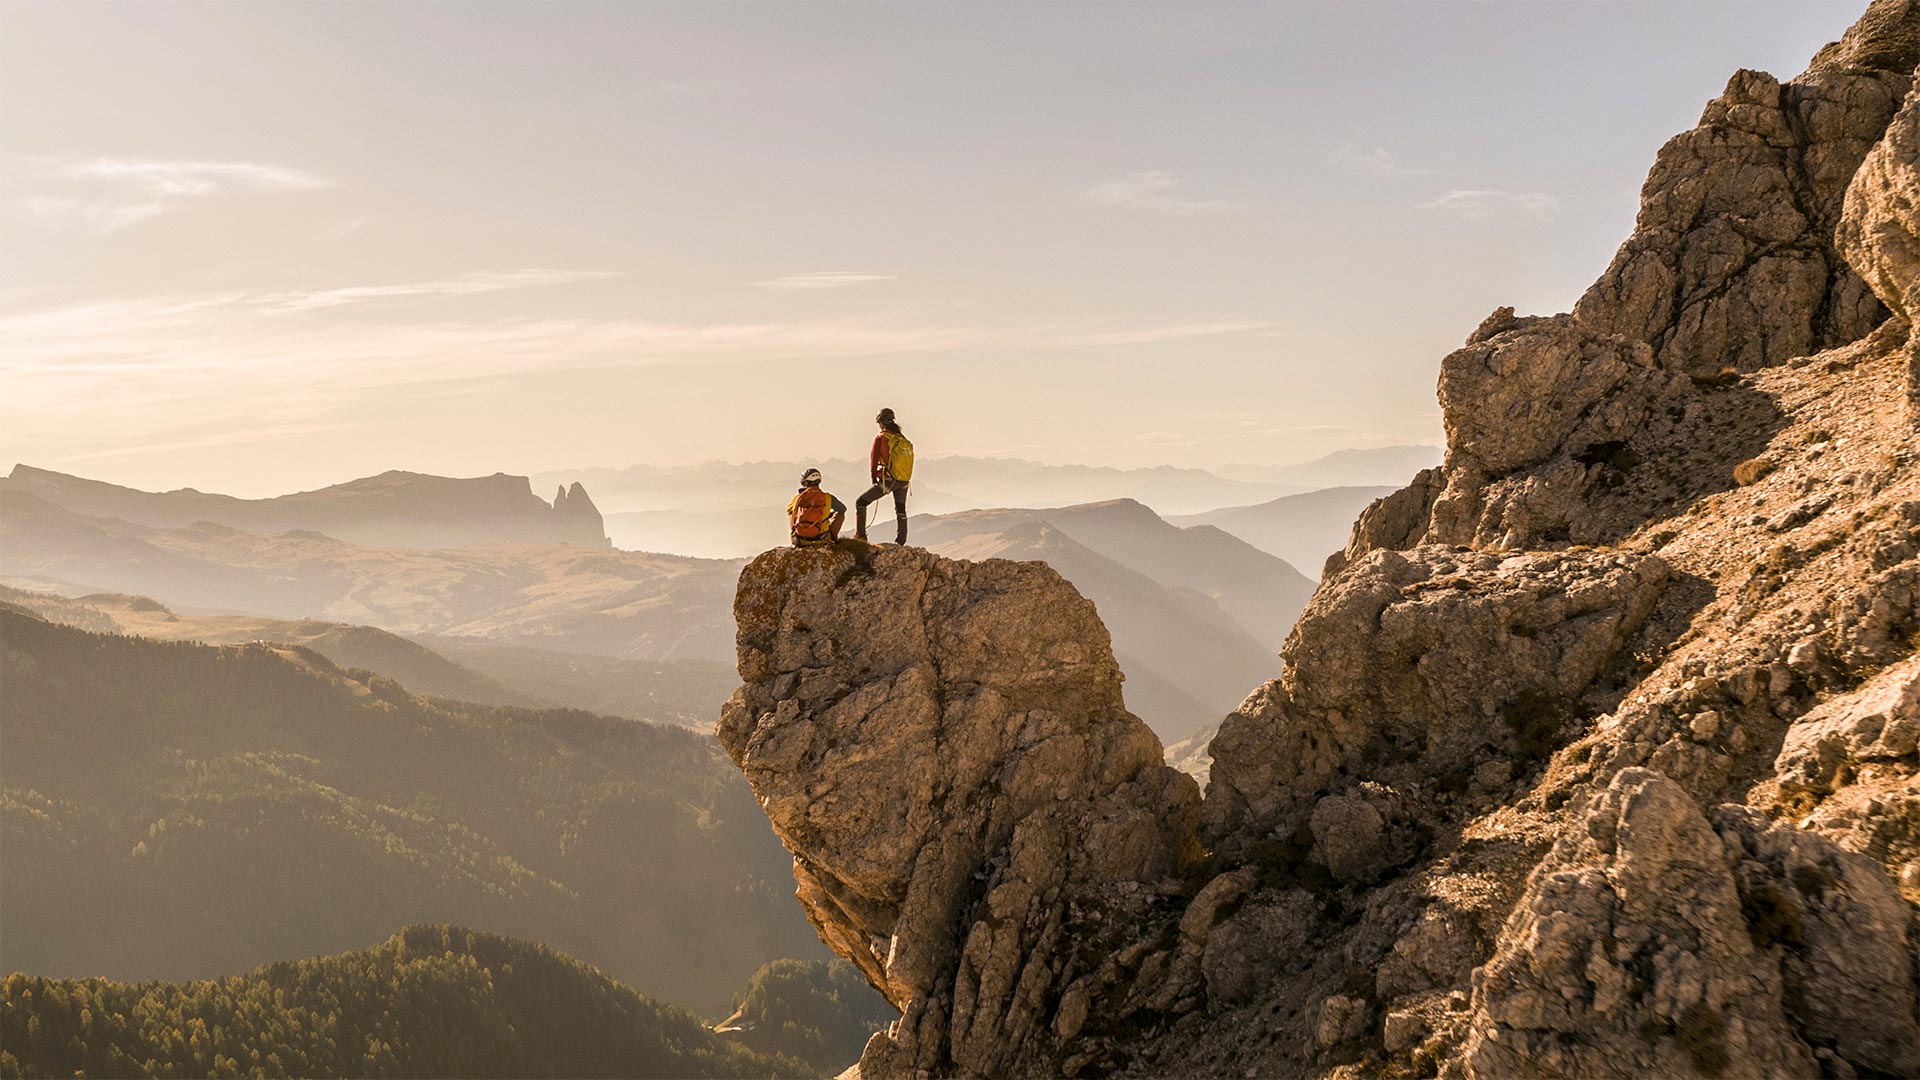 Two climbers on a cliff enjoy a panoramic view of Bolzano's natural landscapes and are inspired by their beauty.